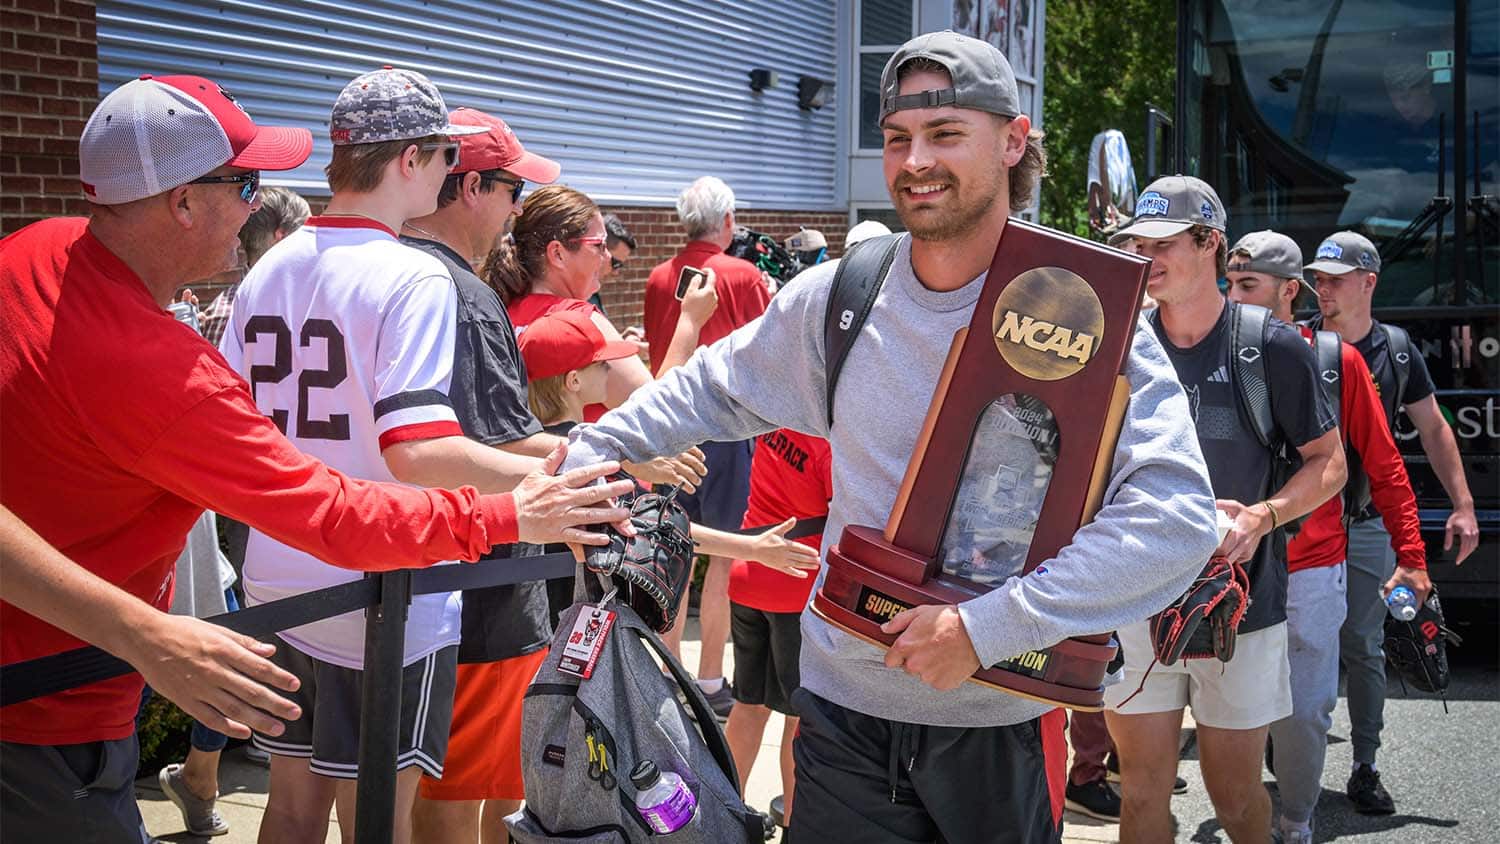 A baseball player in street clothes greets a long line of fans while holding an NCAA trophy